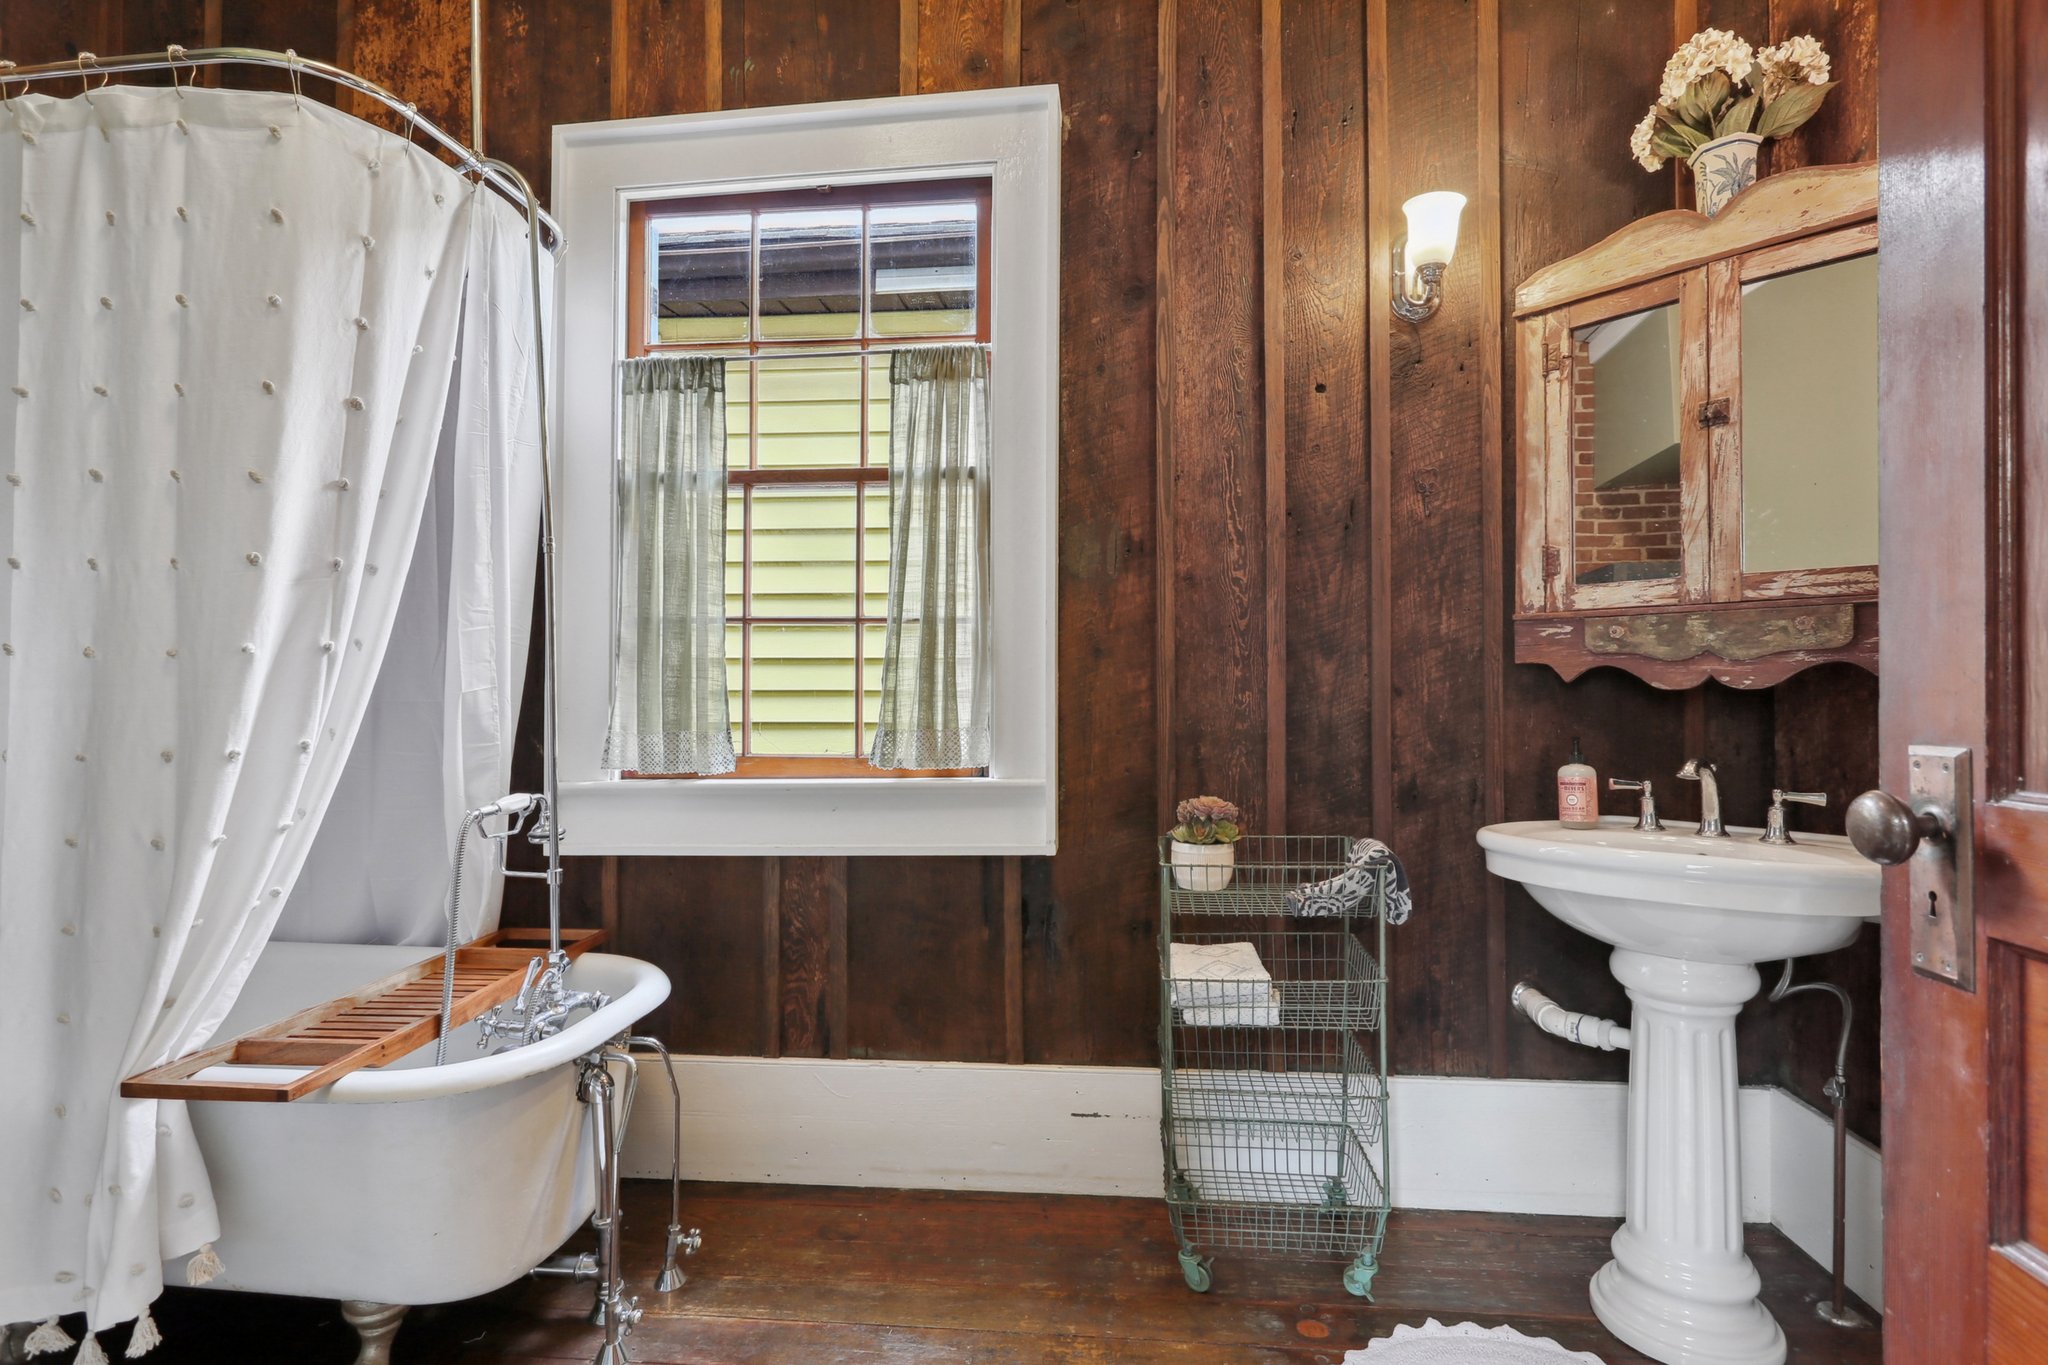 A spacious full bathroom is situated off of the hallway between the two bedrooms.